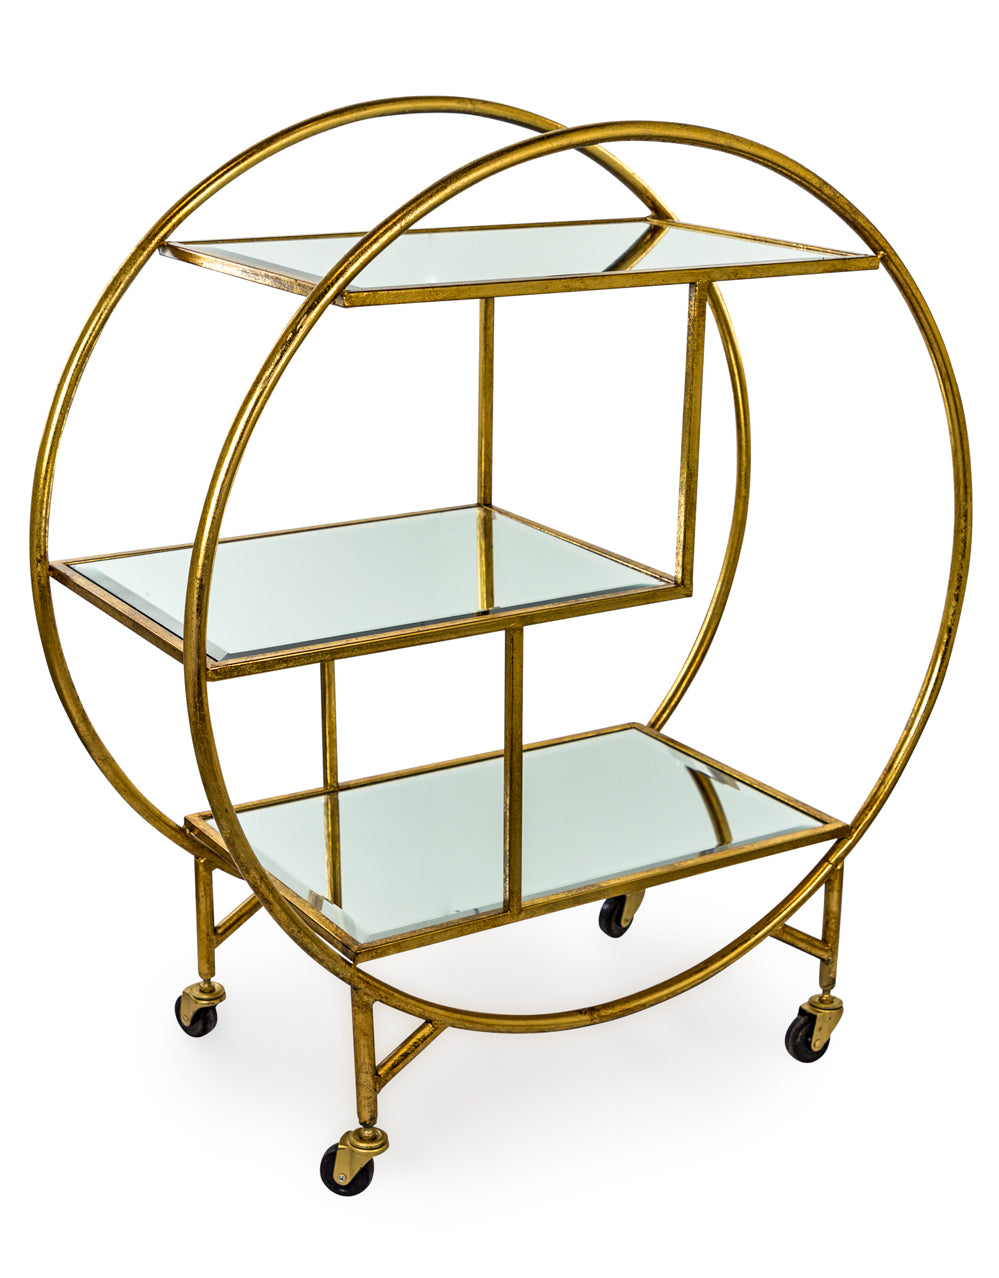 Antique Gold/Bronze Leaf Metal Bar Trolley with Mirror Shelves